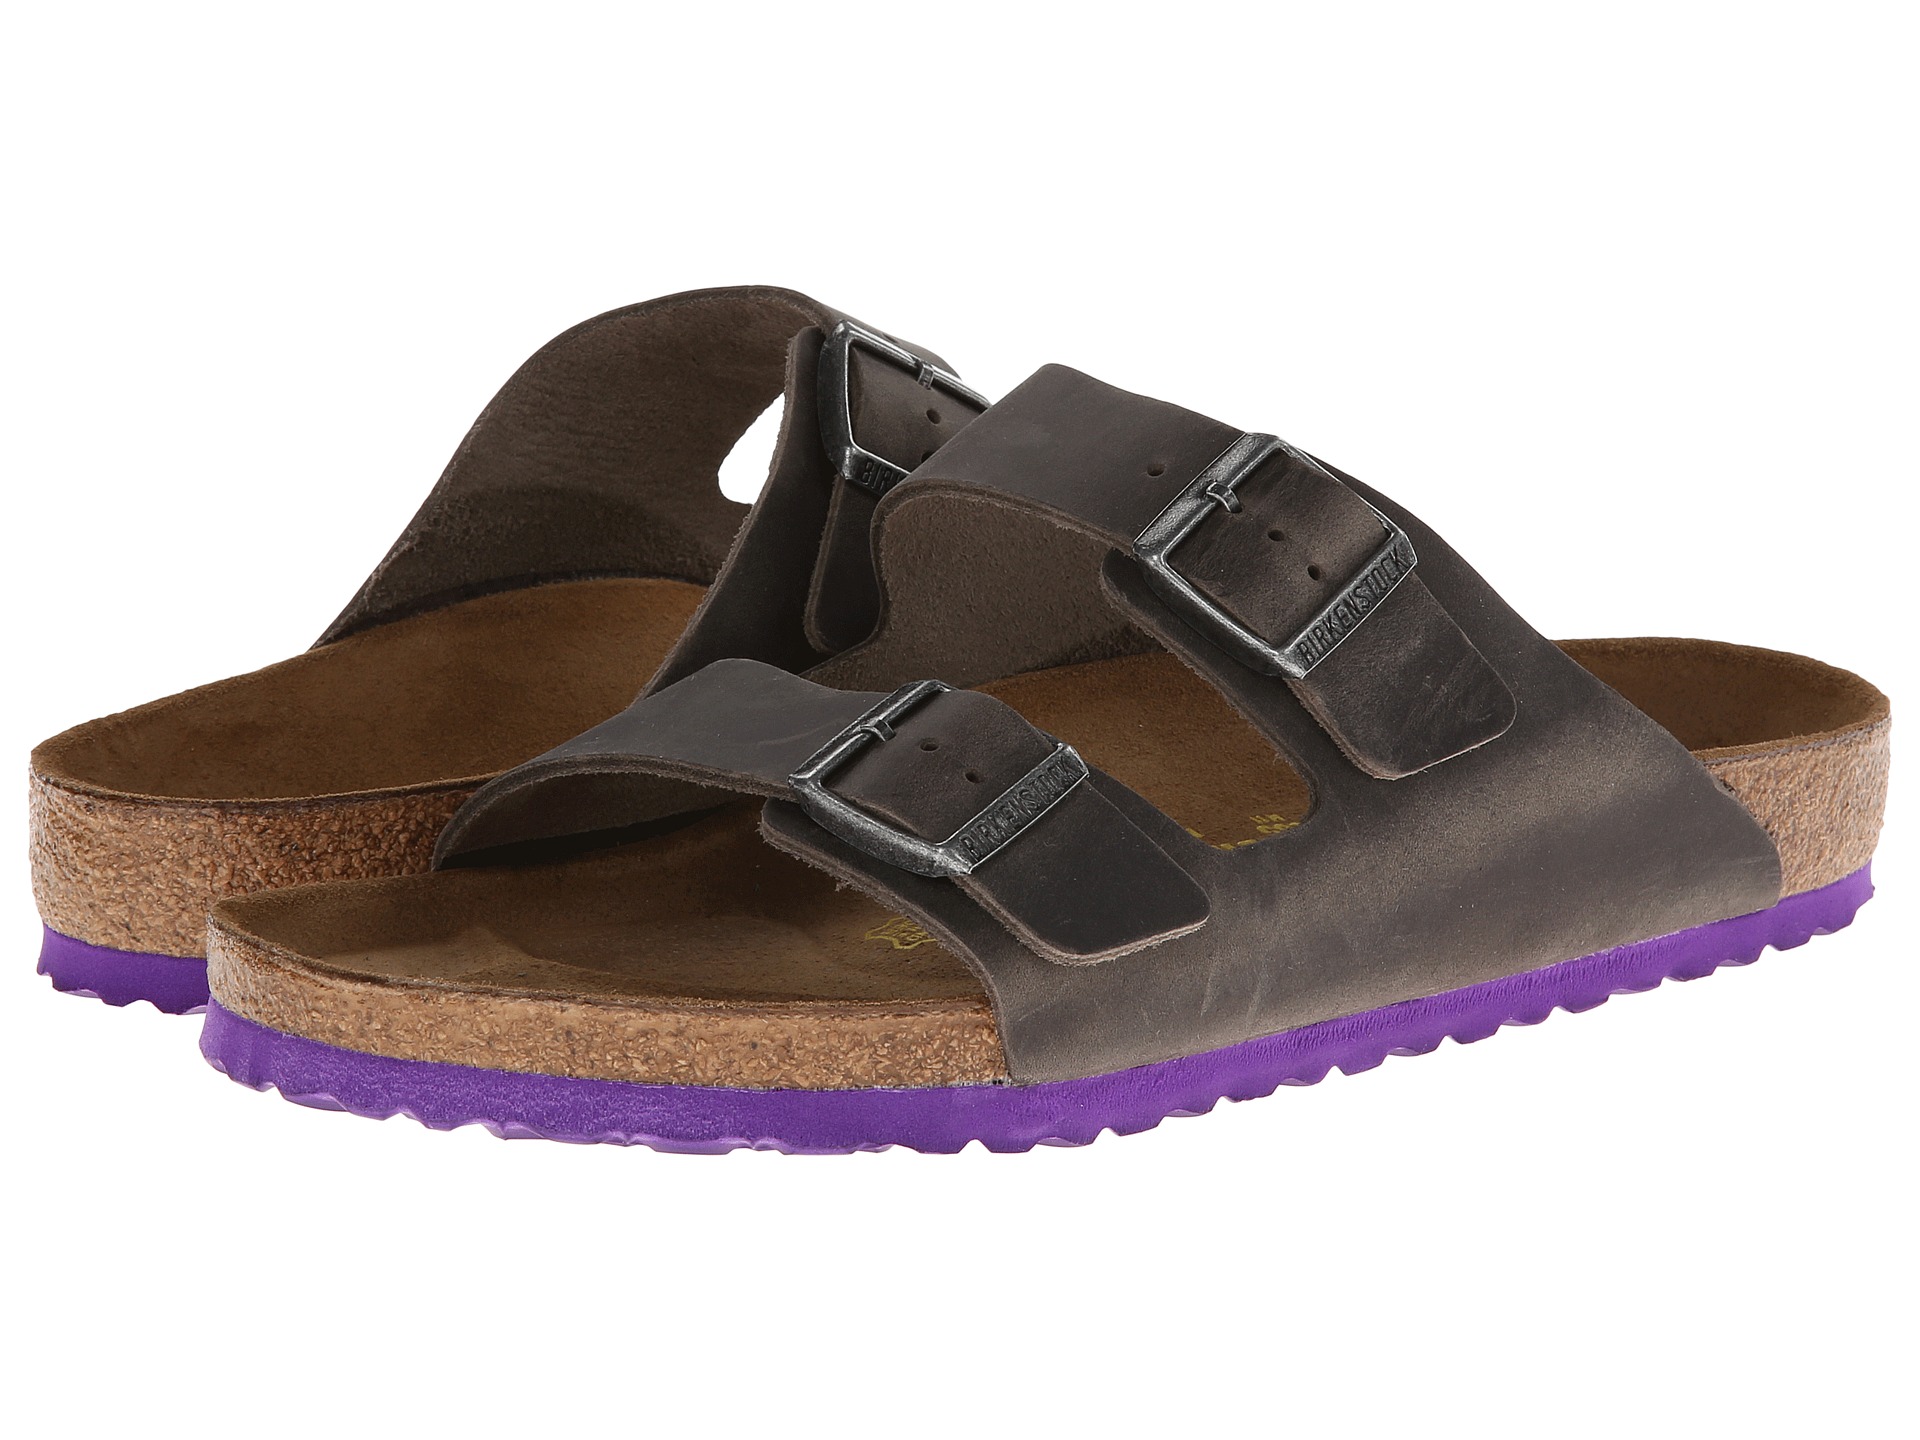 Birkenstock Arizona Iron Oiled Leather, Shoes | Shipped Free at Zappos